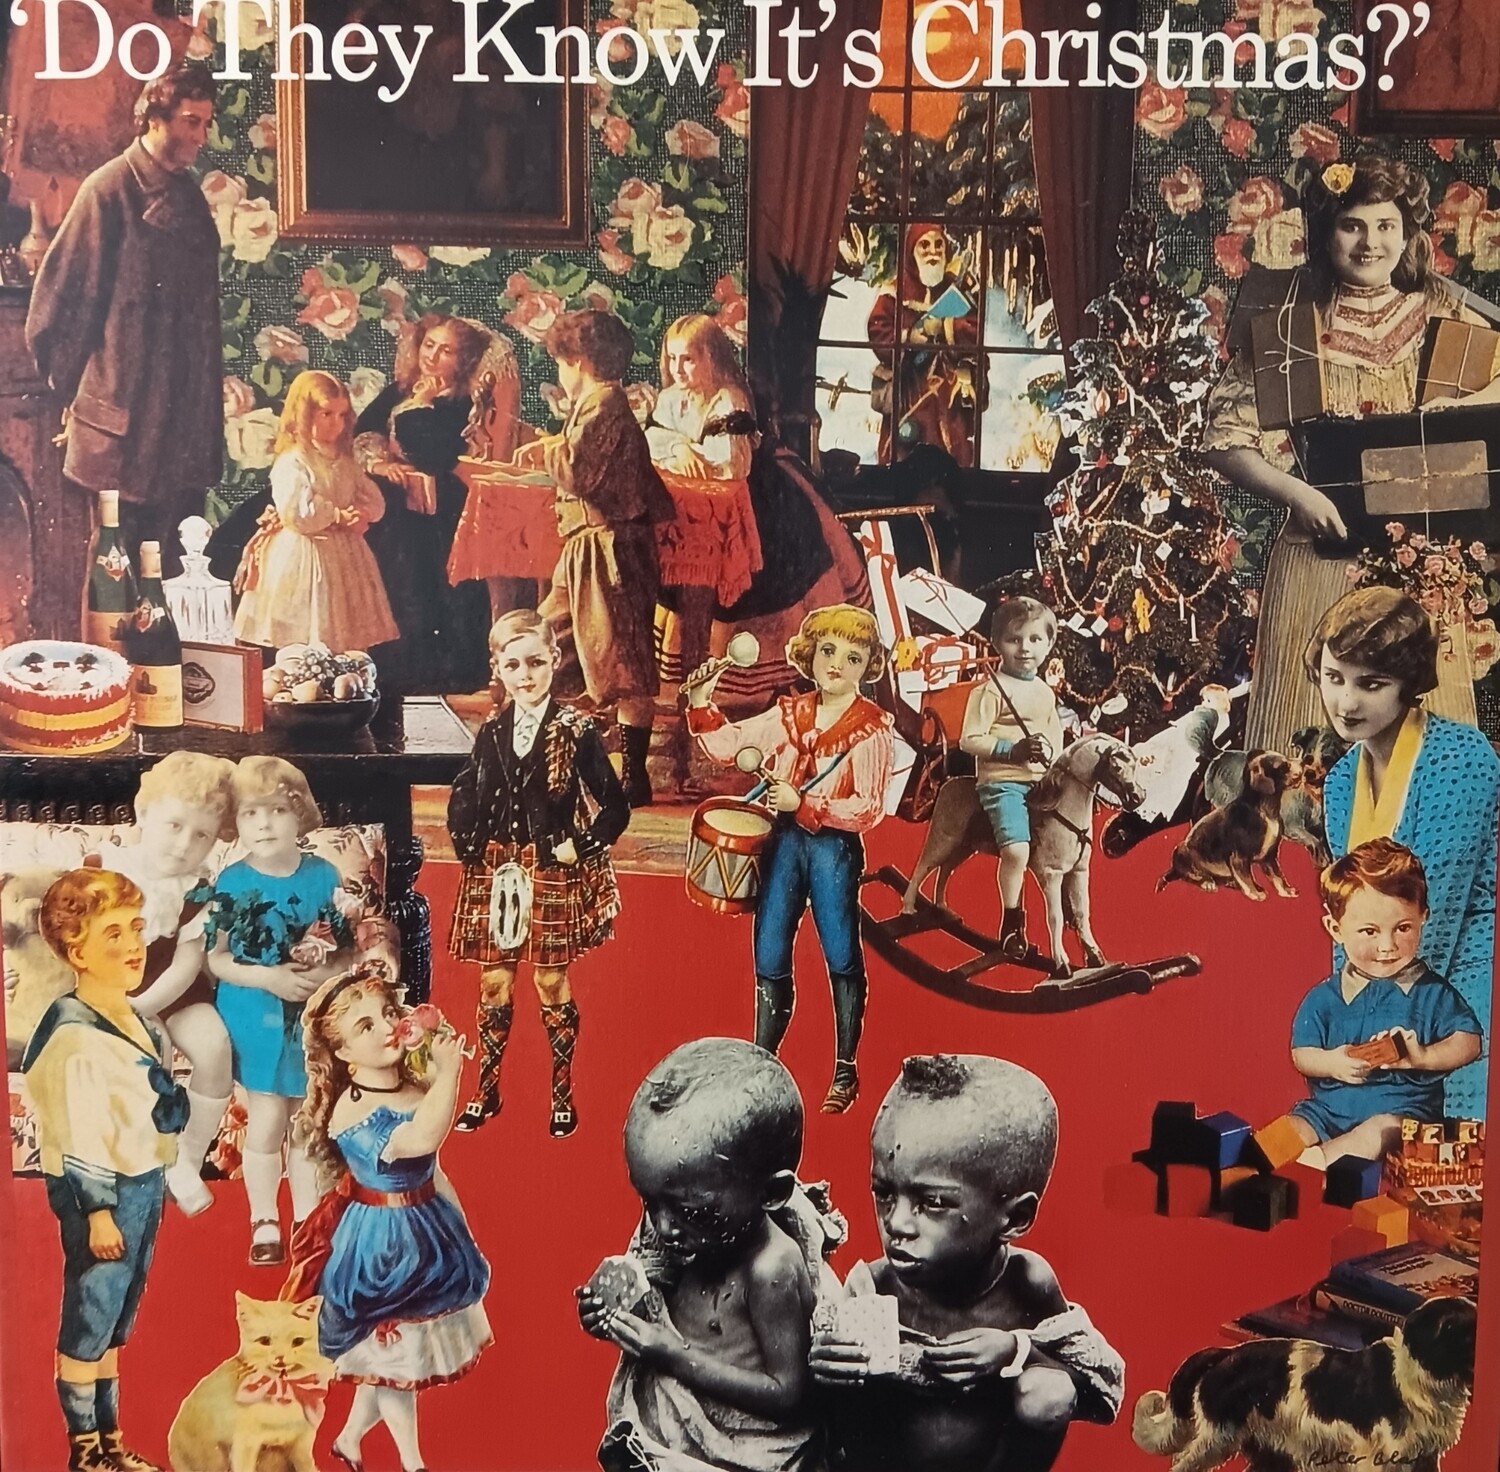 BAND AID - Do they know it's Christmas